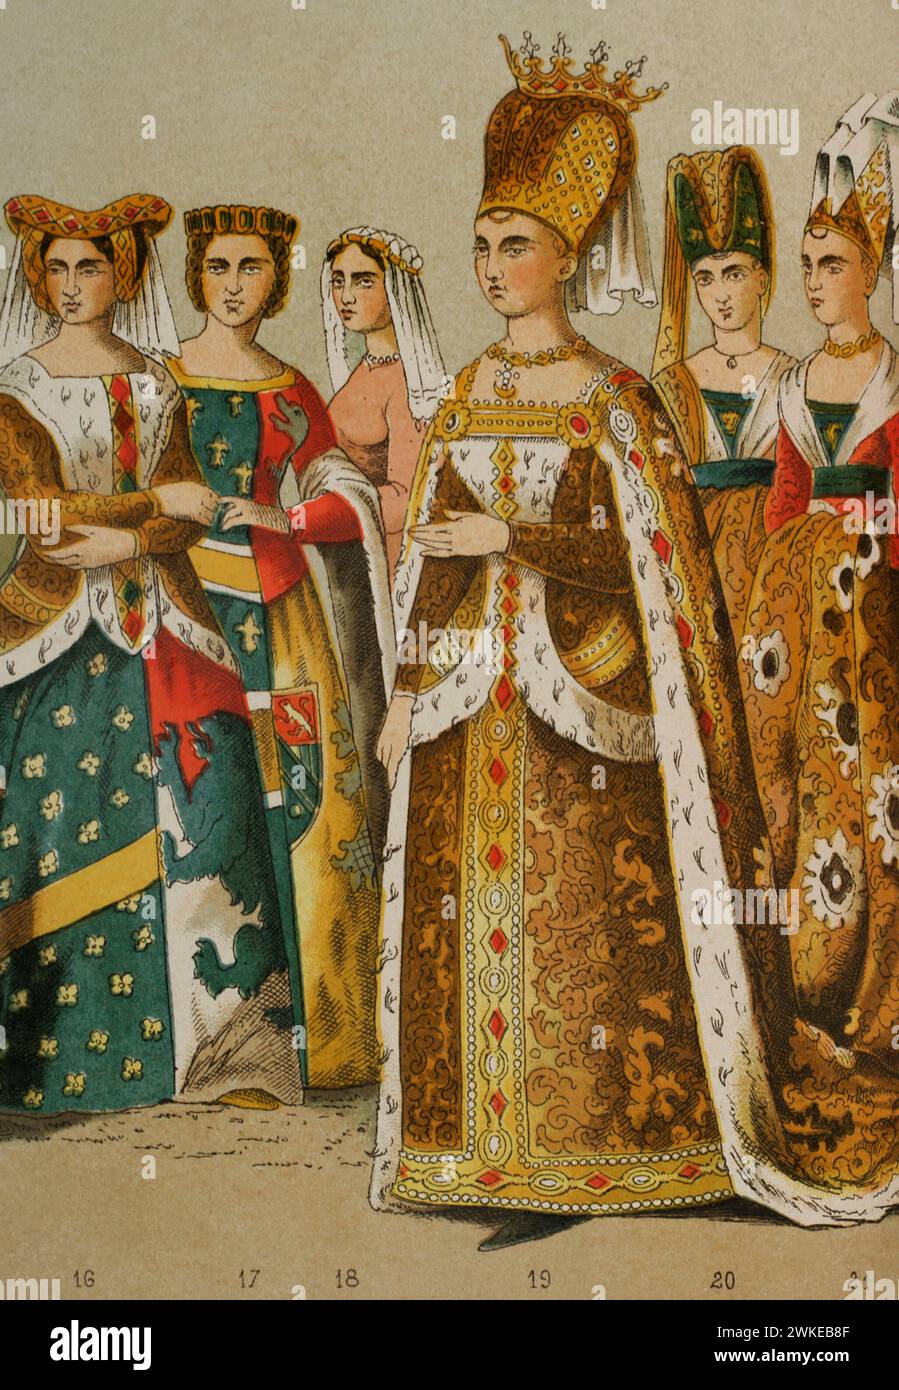 History of France. 1300. From left to right, 16: lady, 17: princess, 18: lady, 19-20-21: Isabella of Bavaria (wife of King Charles VI) and ladies of her retinue. Chromolithography. Detail. 'Historia Universal', by César Cantú. Volume VI, 1885. Stock Photo